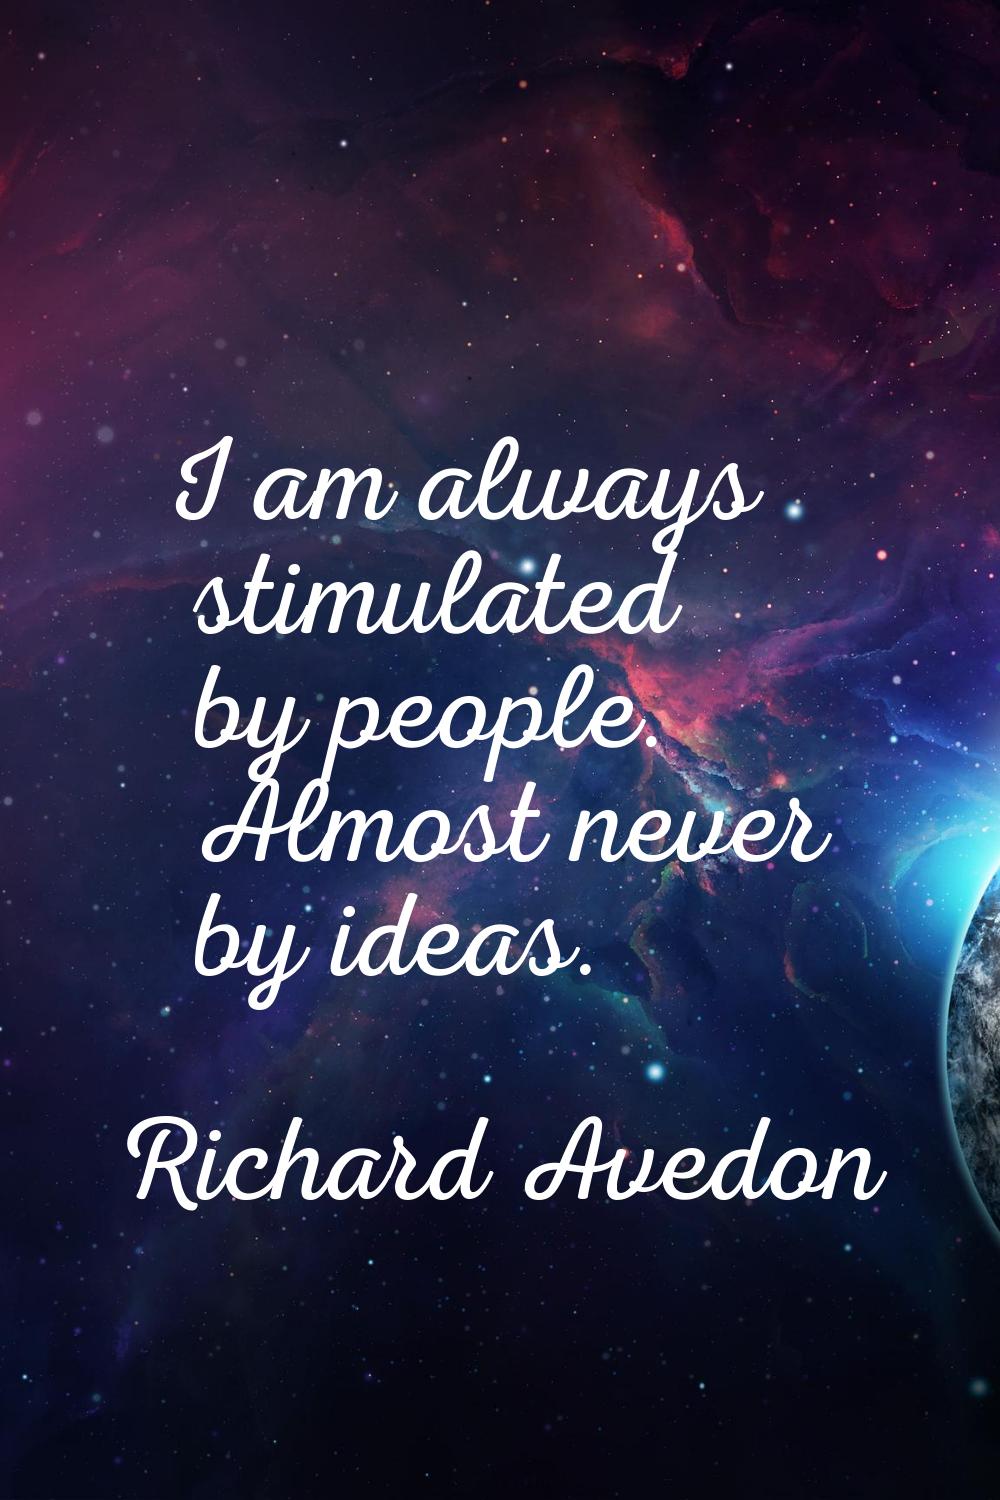 I am always stimulated by people. Almost never by ideas.